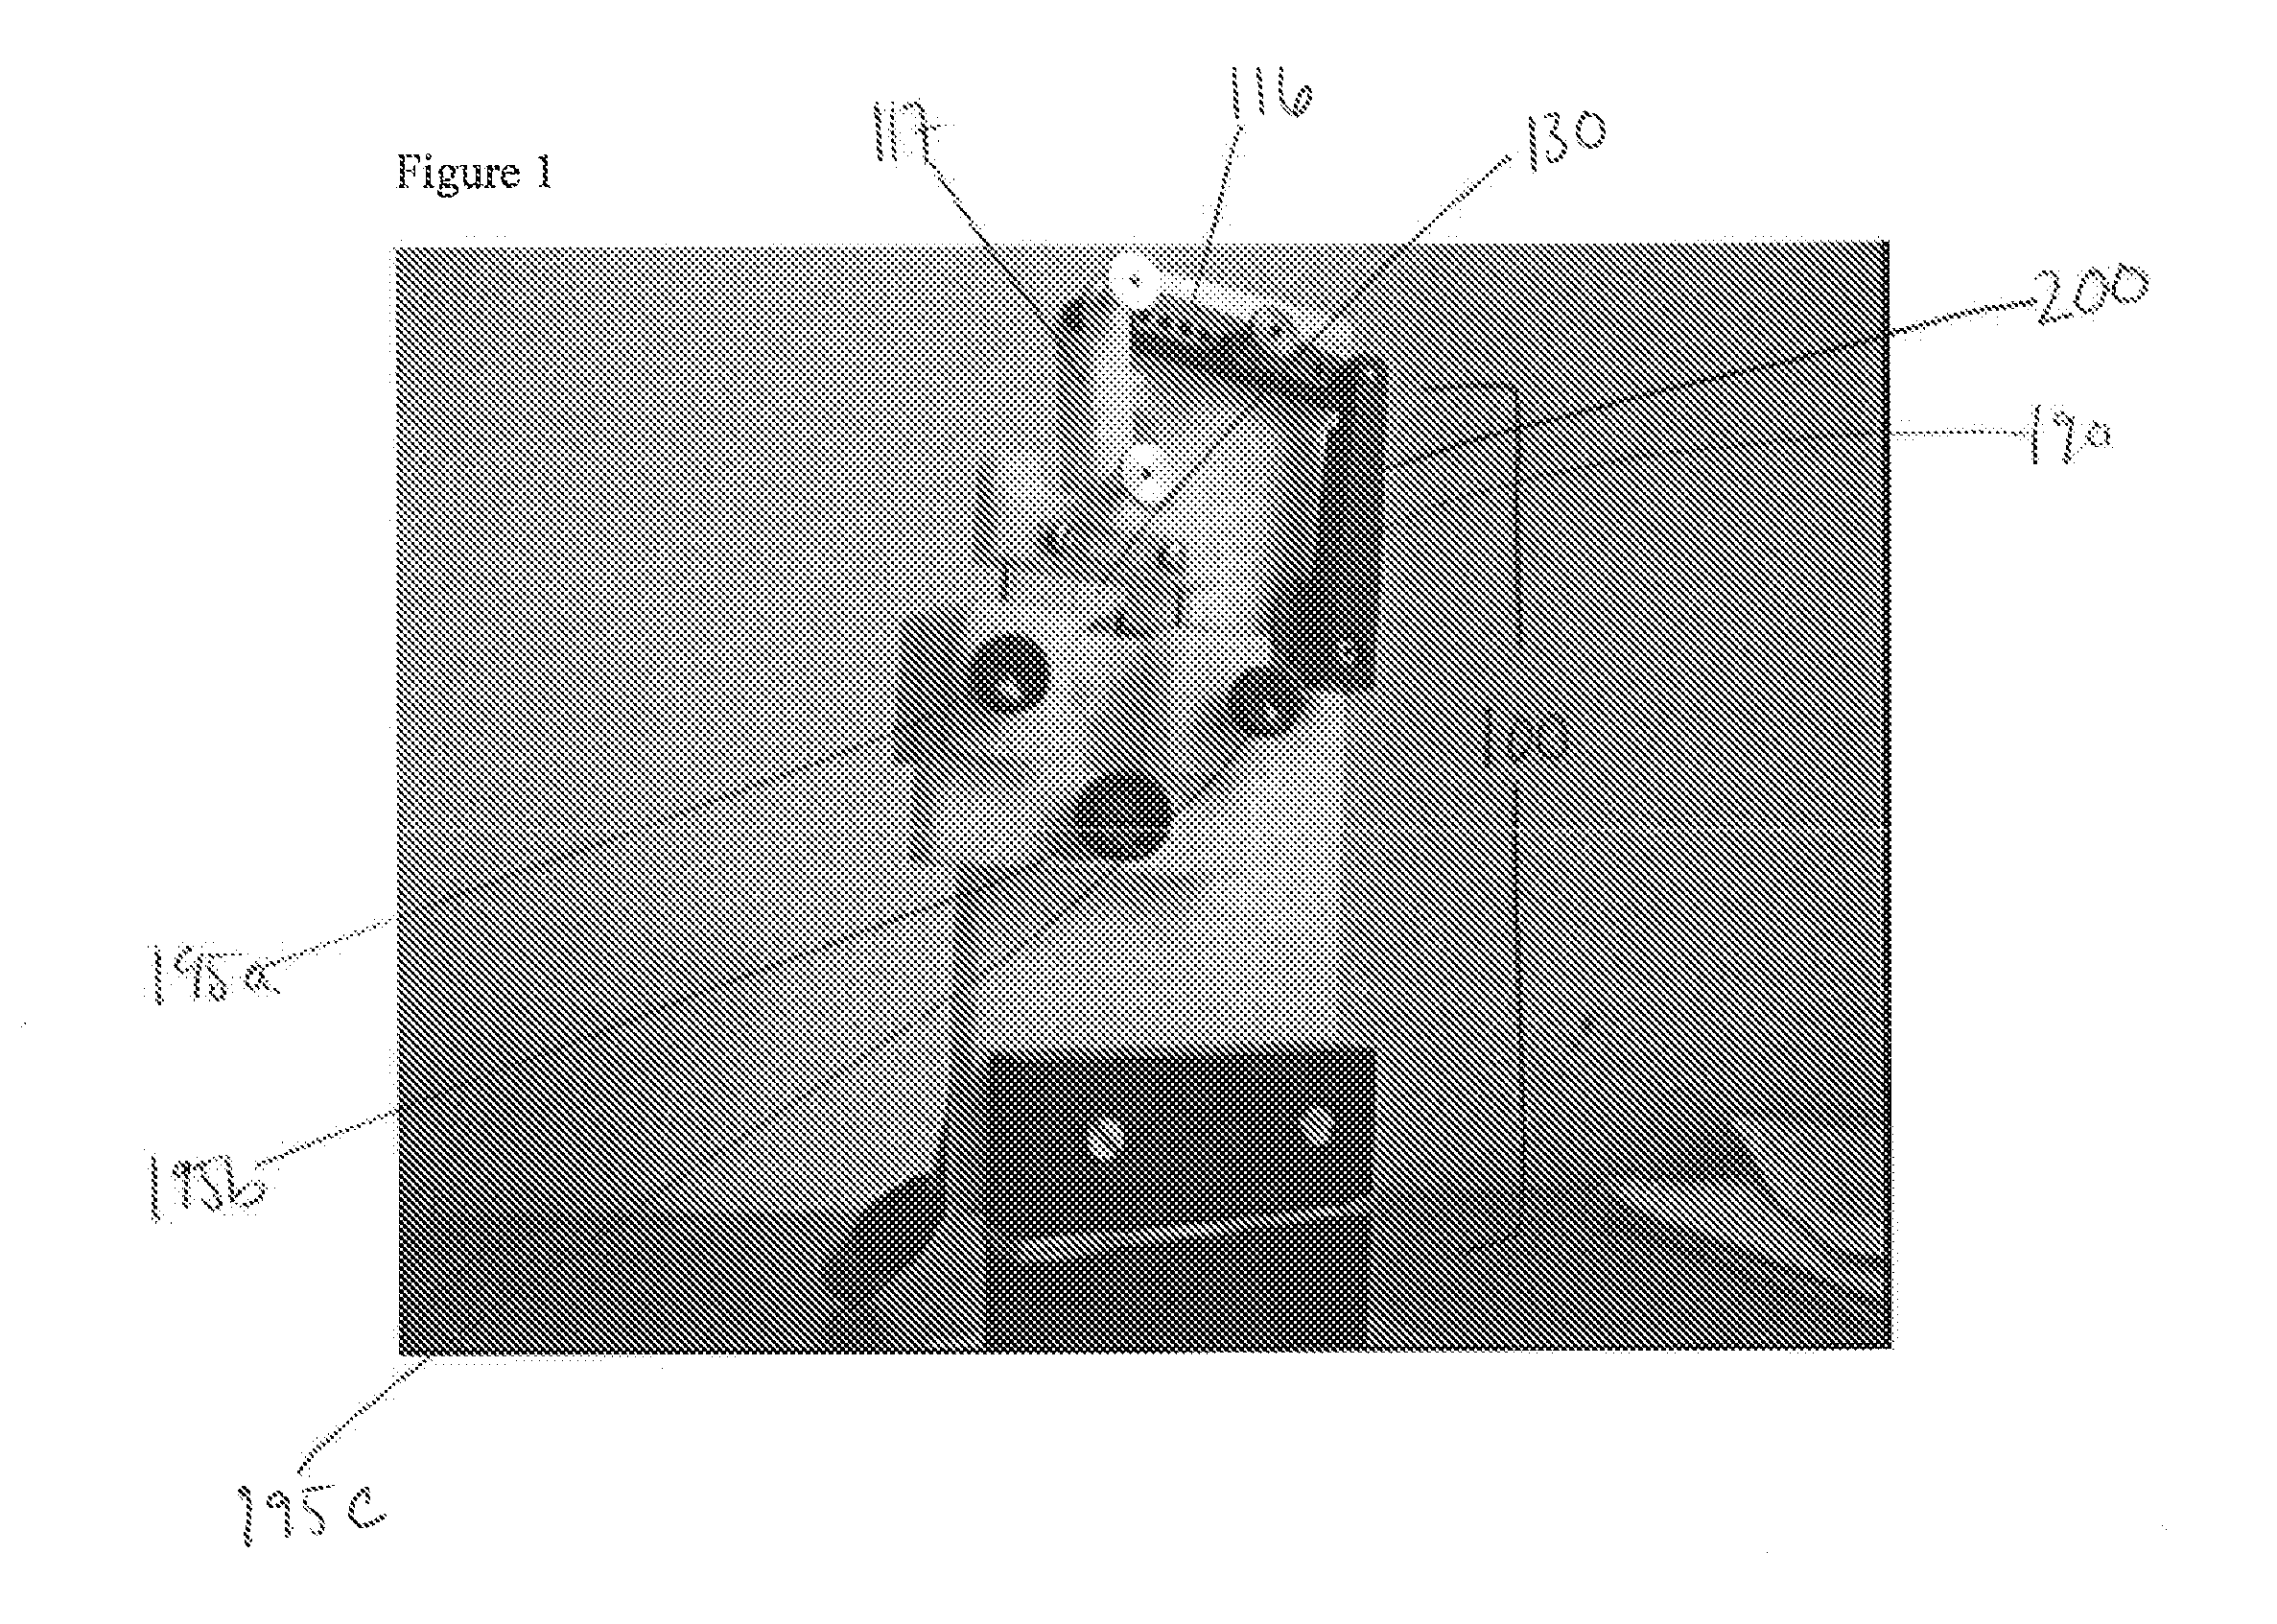 Shear flow device and methods of use